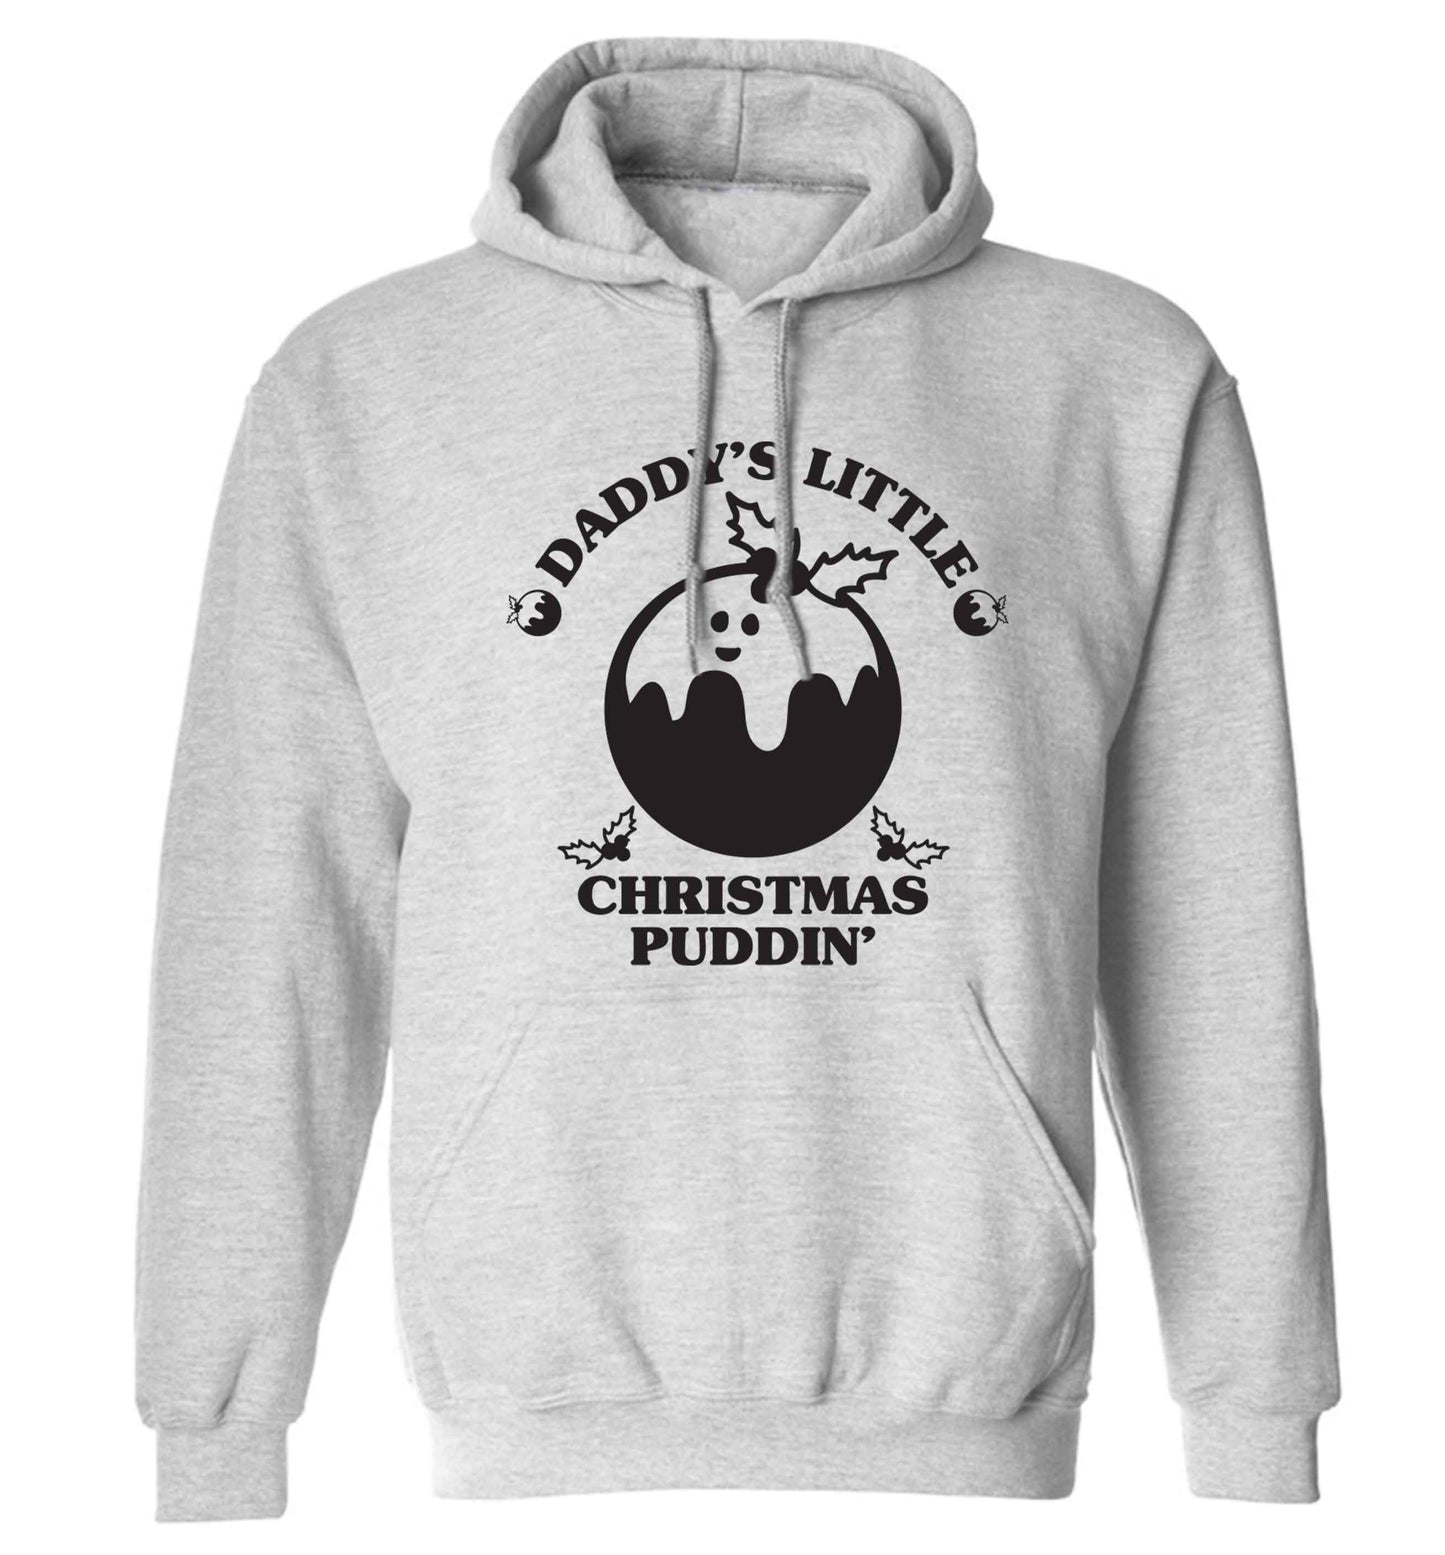 Daddy's little Christmas puddin' adults unisex grey hoodie 2XL